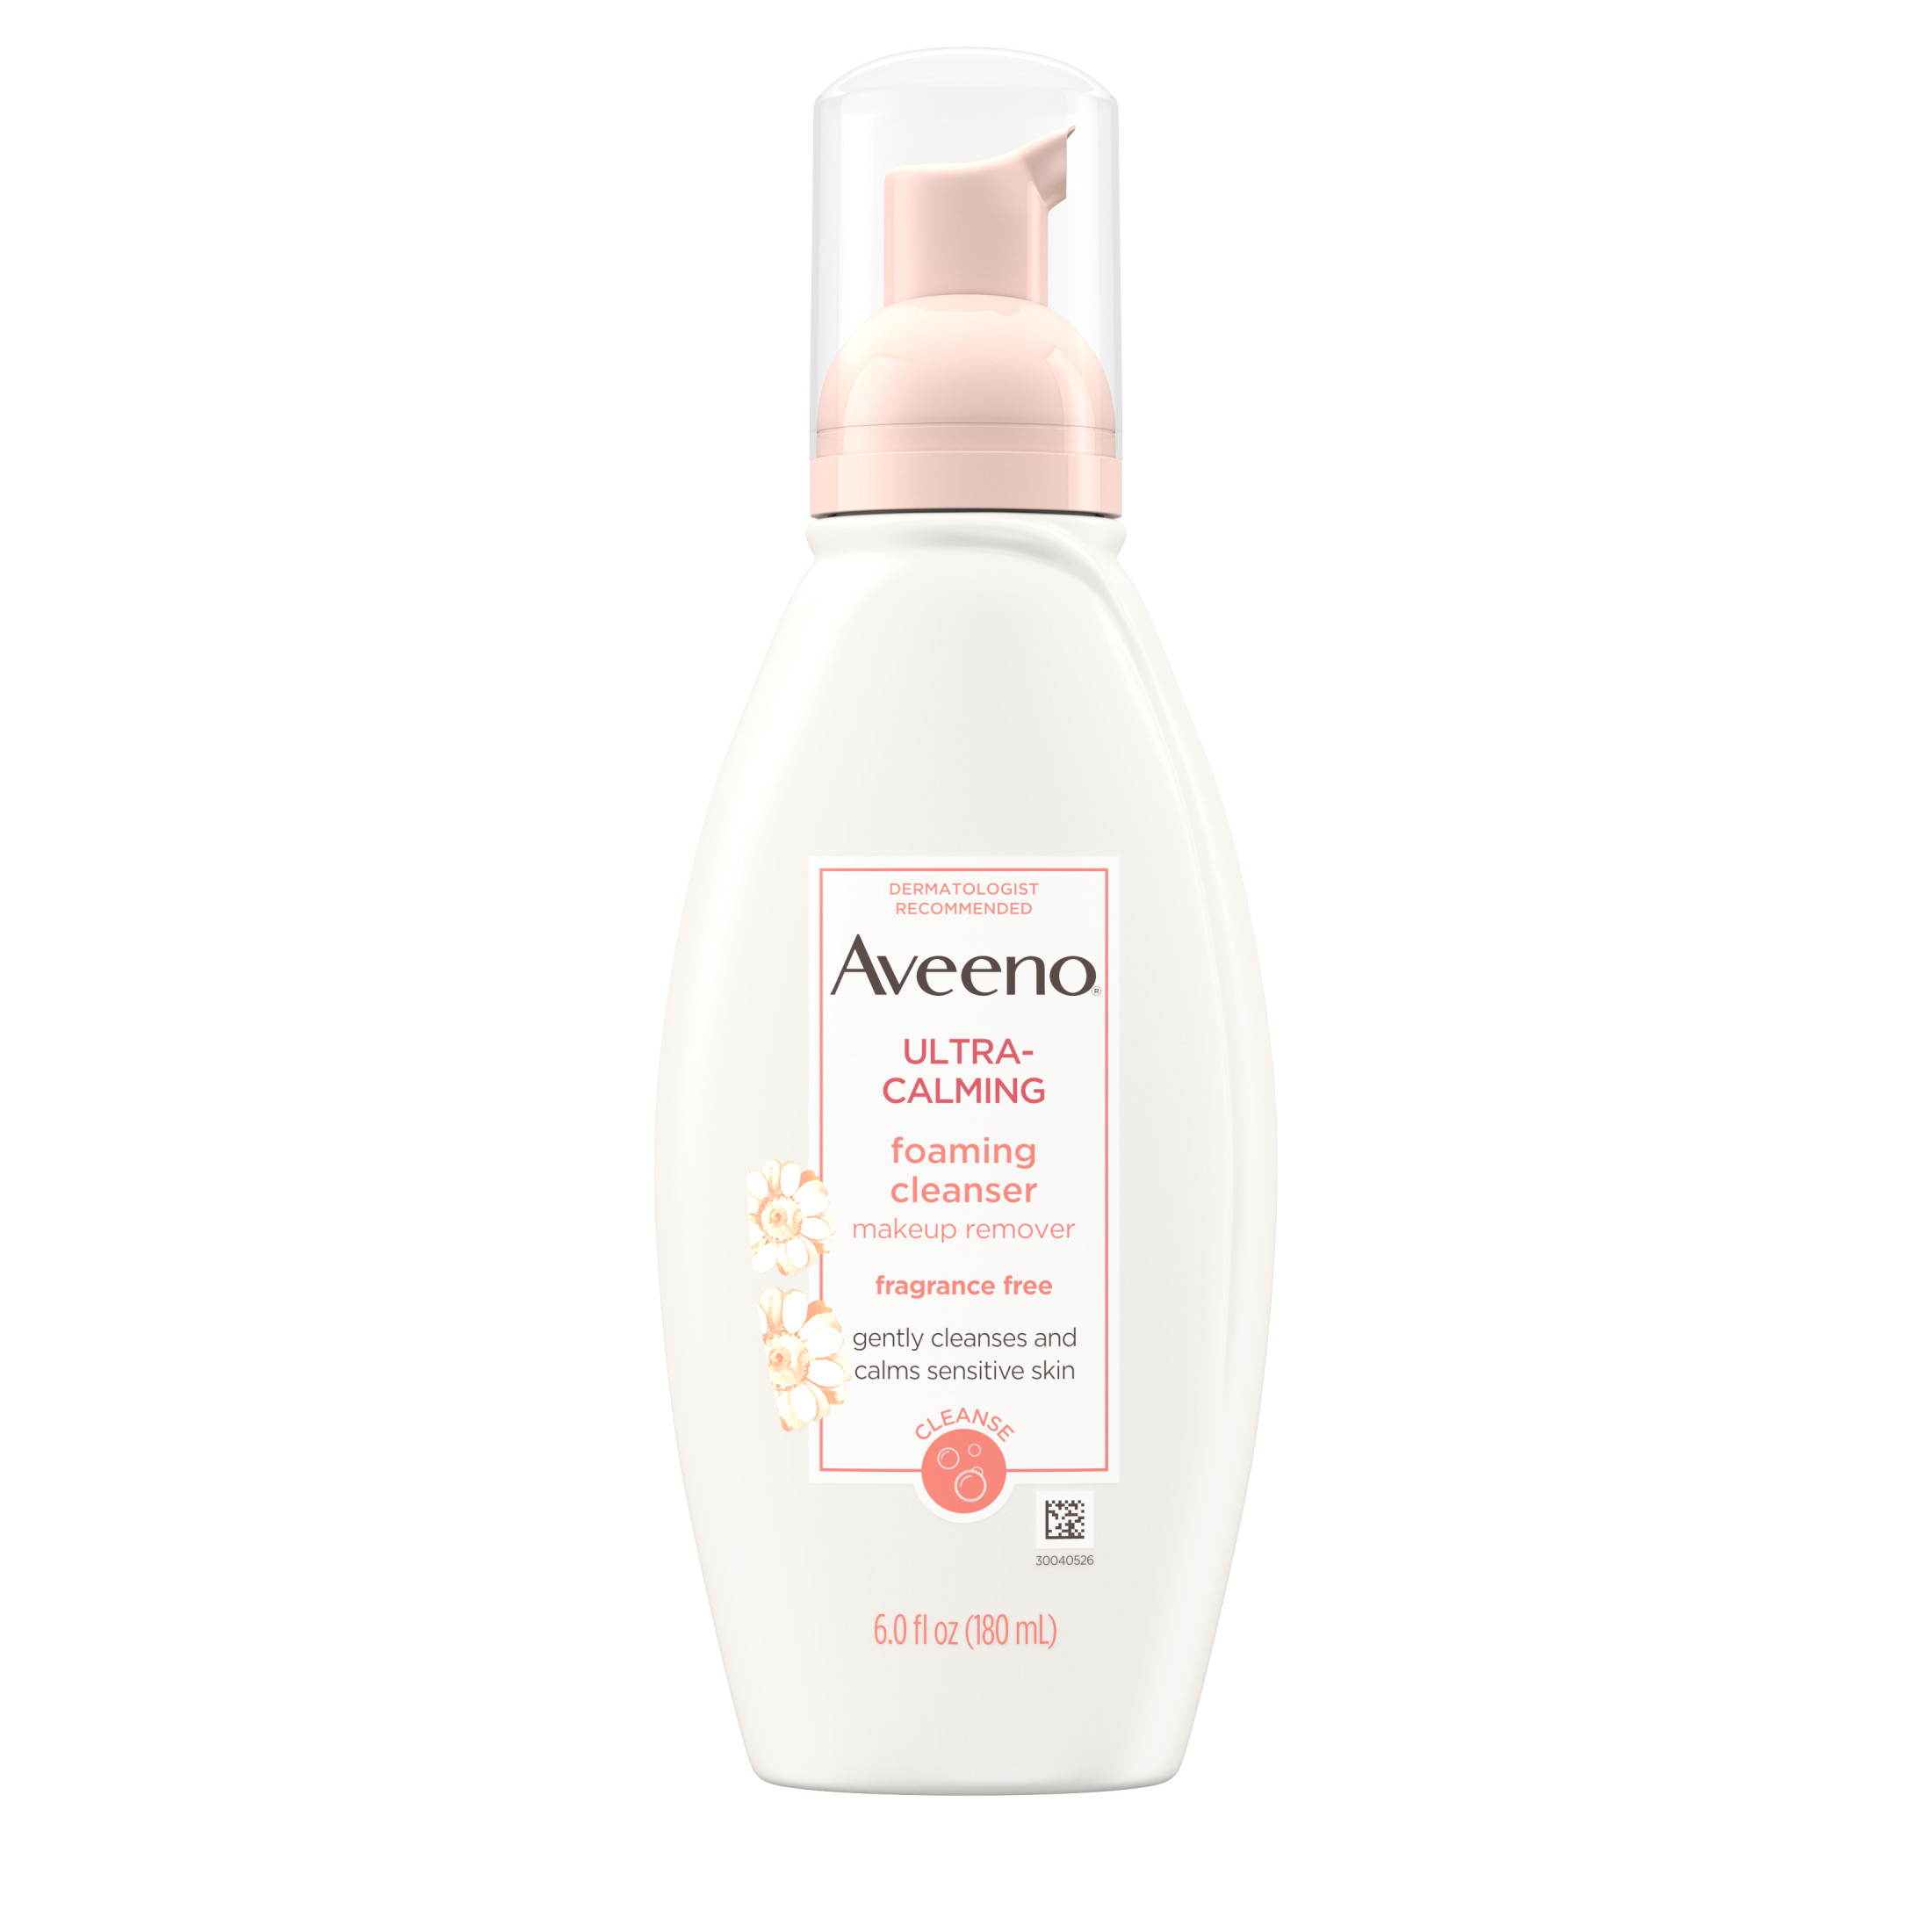 Aveeno Ultra-Calming Foaming Cleanser for Dry Sensitive Skin, Face Wash, 6 fl. oz - image 1 of 15